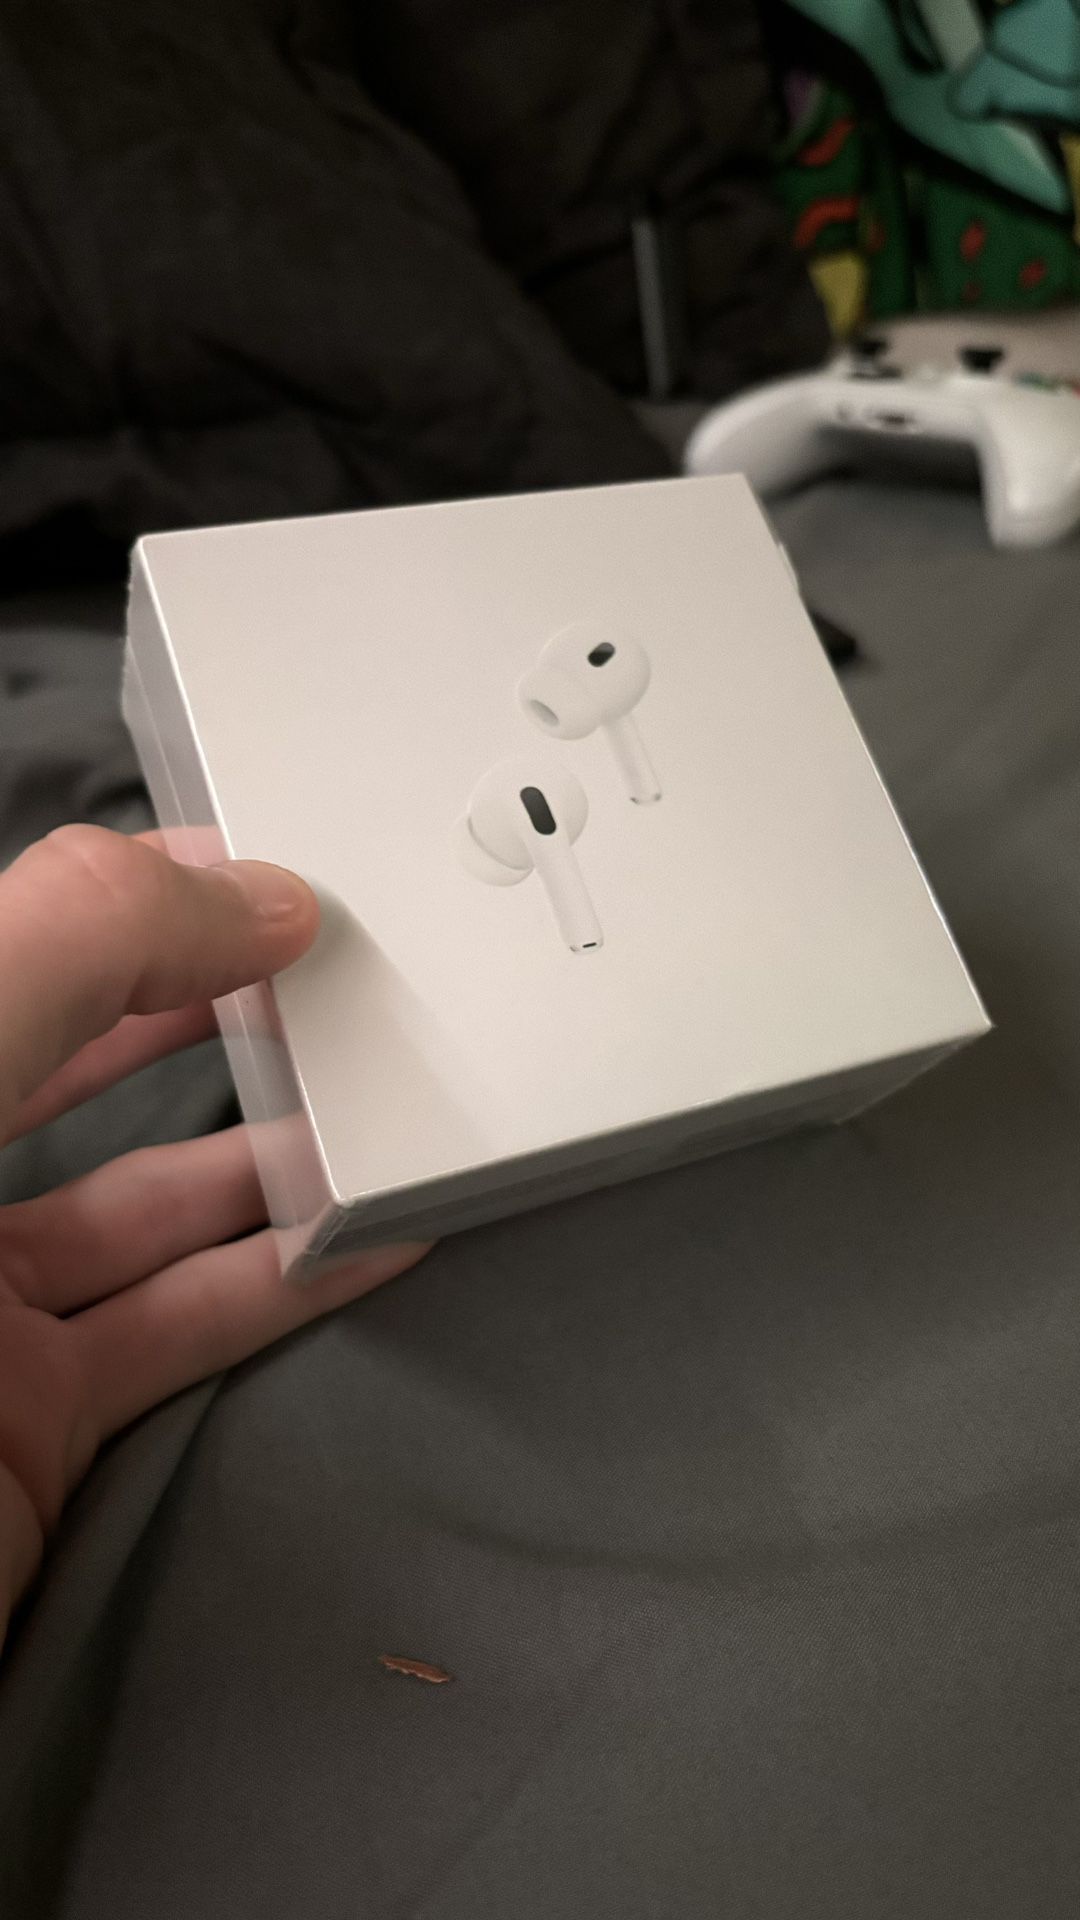 (SALE) Airpods Pro’s Generation 2